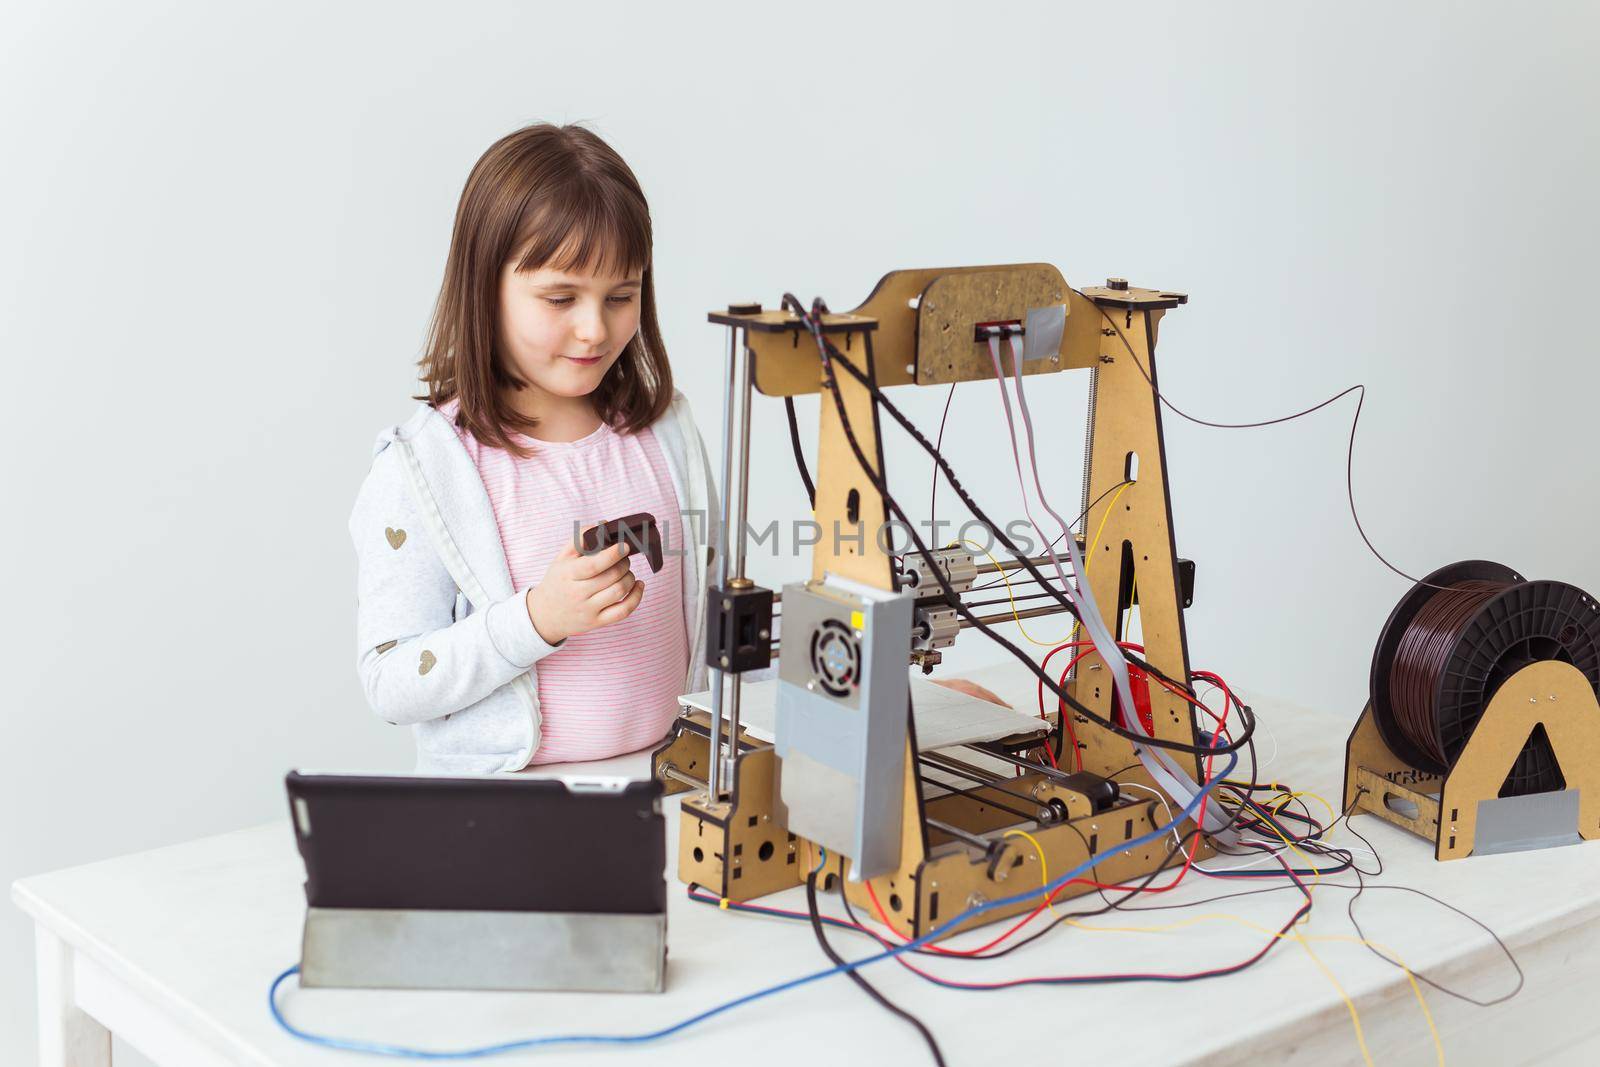 Cute girl with 3d printed shutter shades is watching her 3d printer as it prints her 3d model. by Satura86